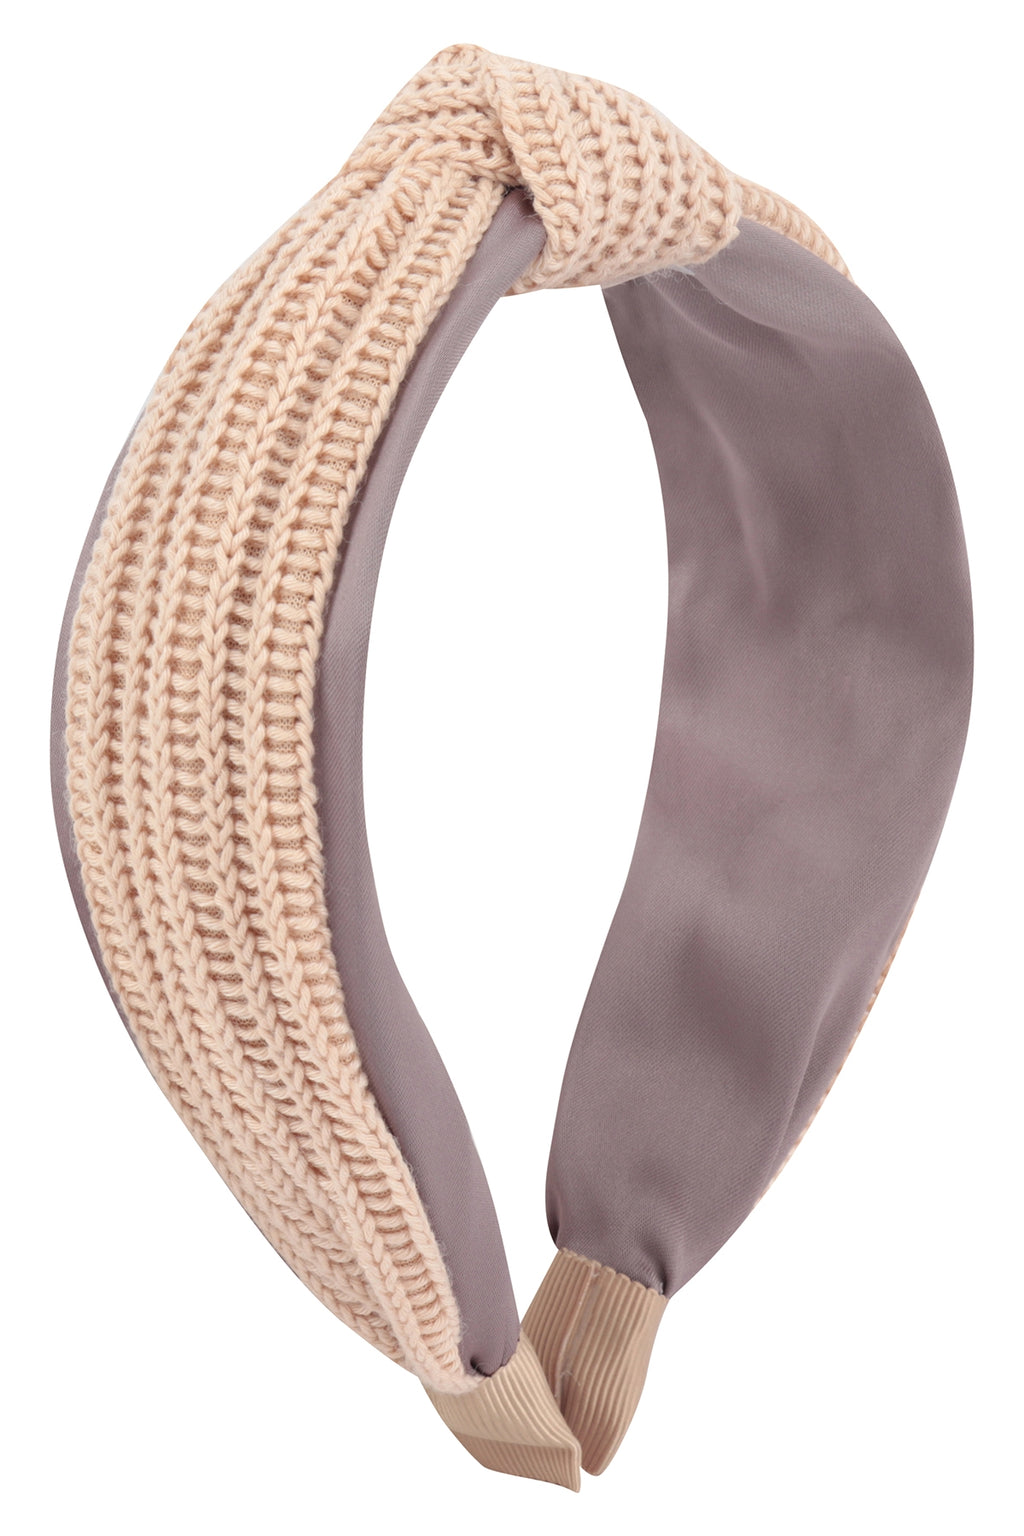 Knitted Knot Headband Hair Accessories Beige - Pack of 6